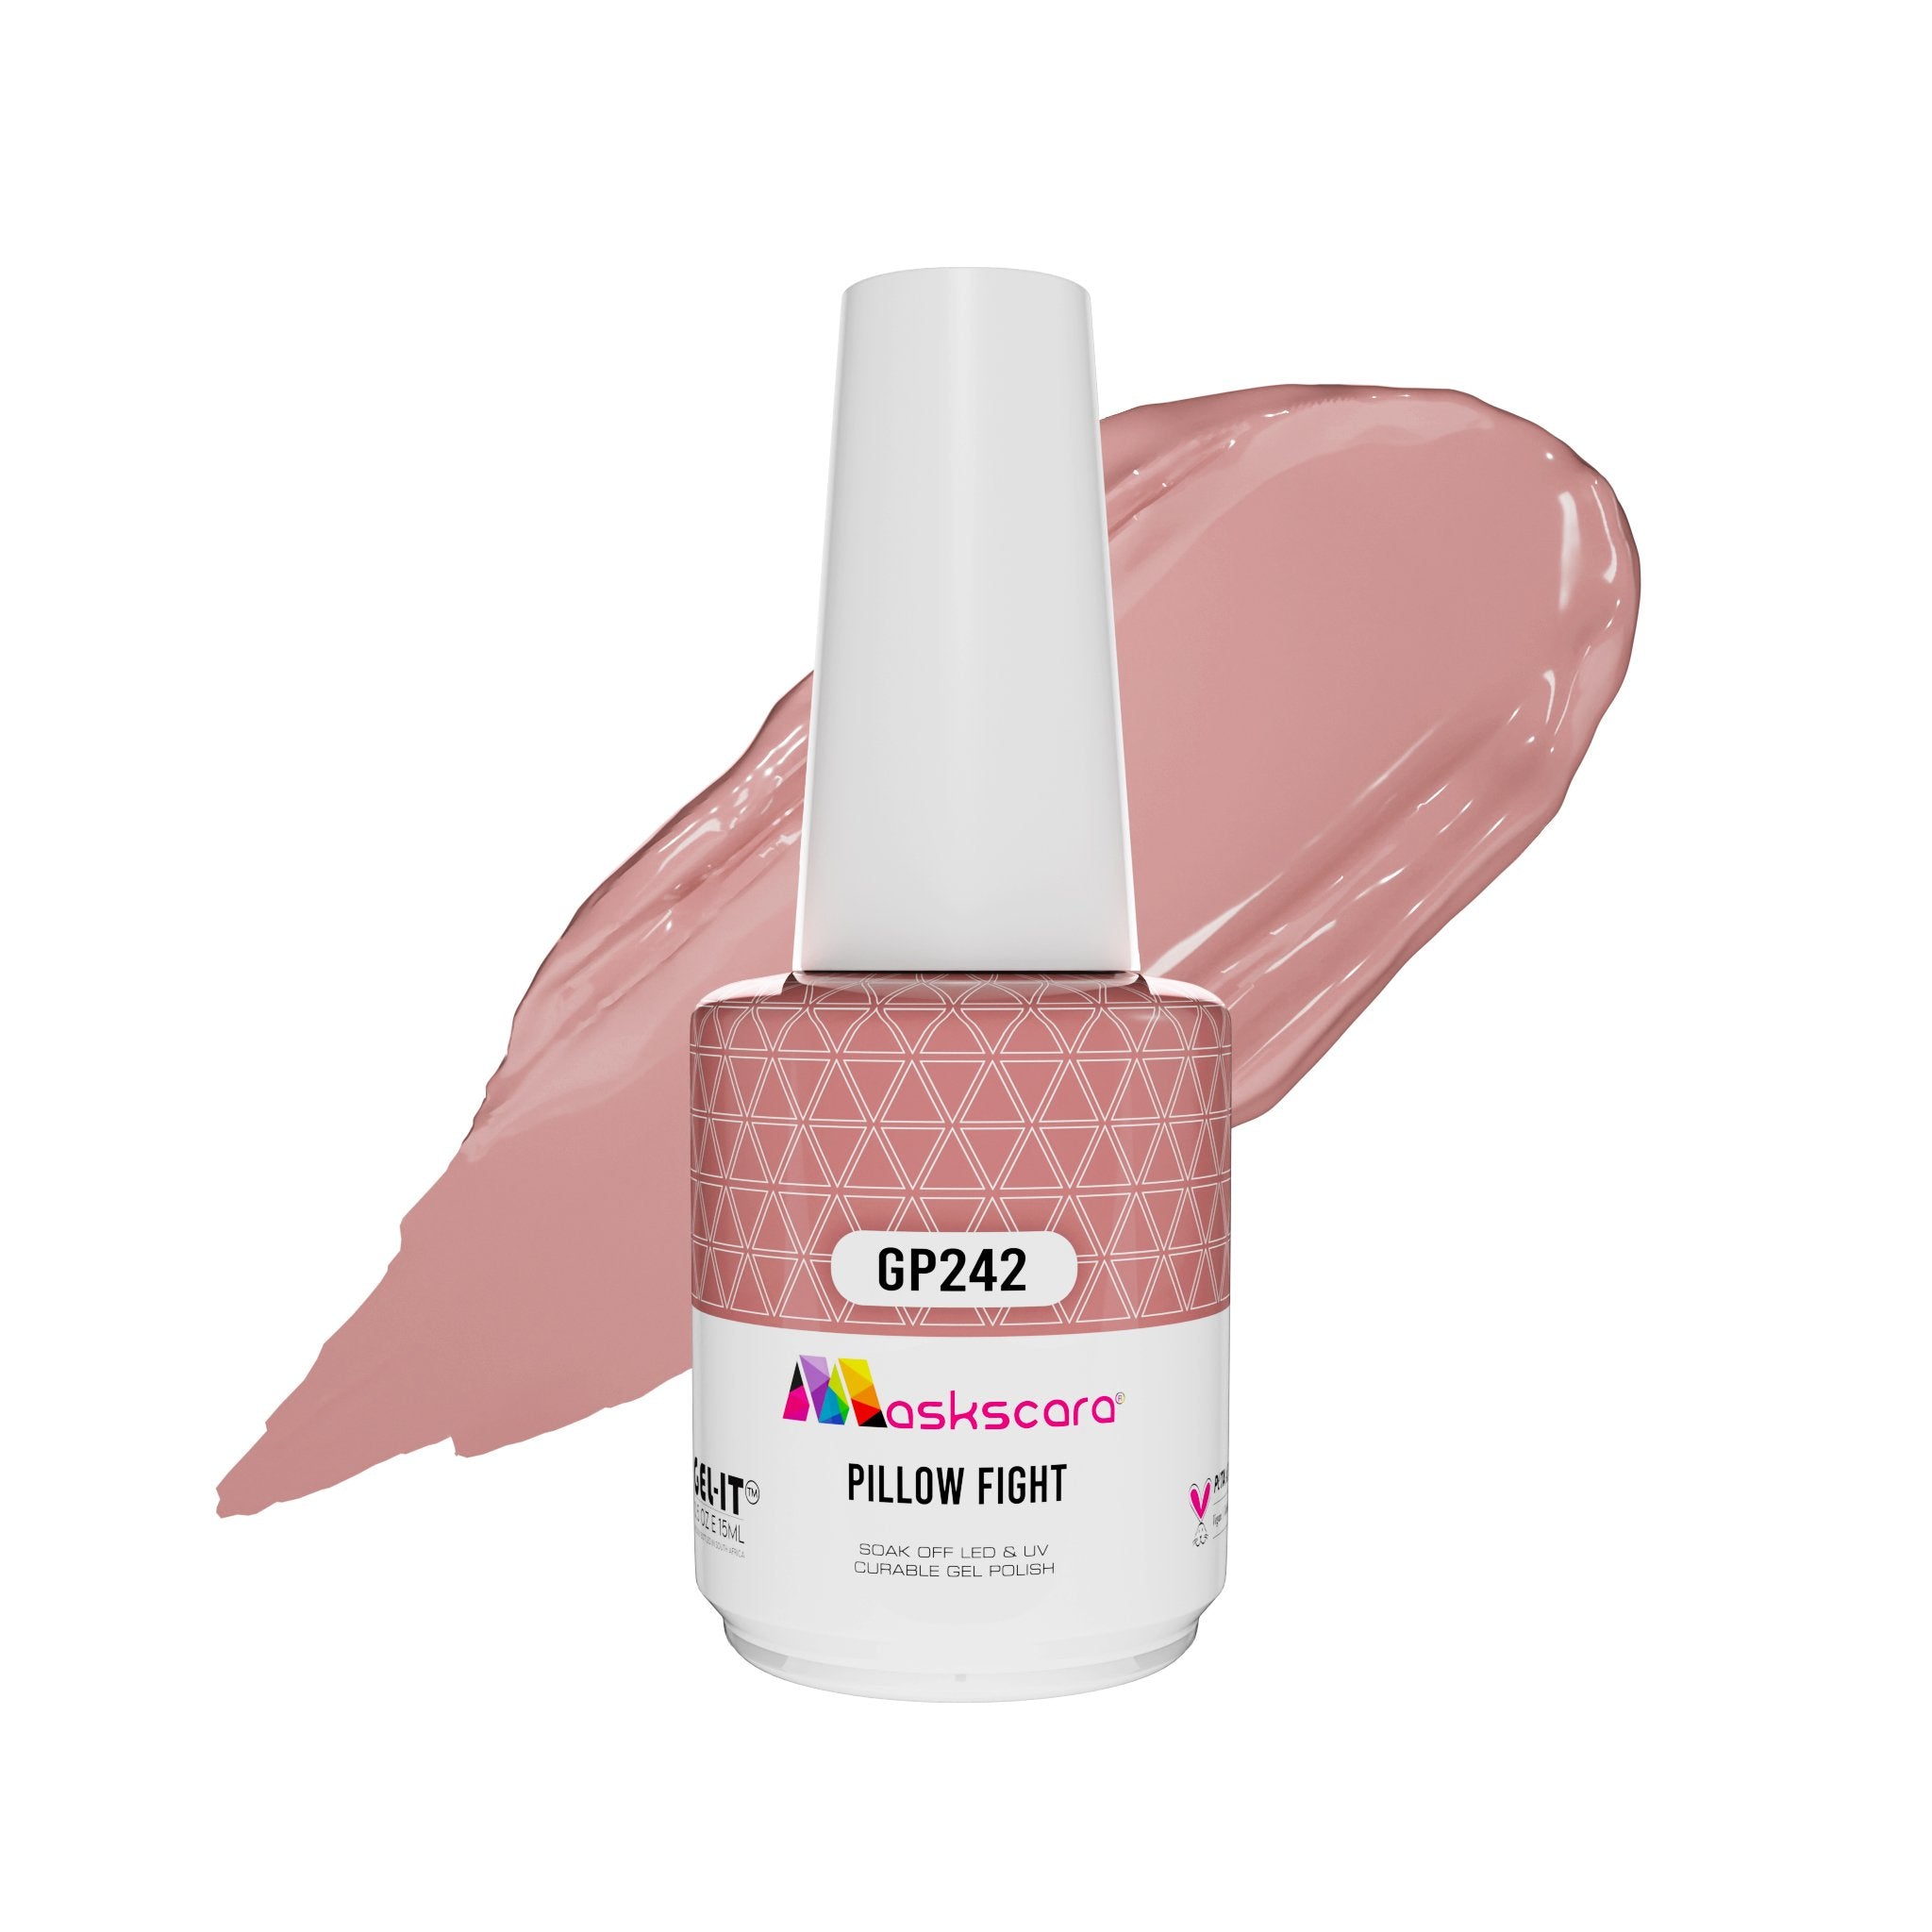 <img scr = “ GP242 Pillow Fight.jpeg” alt = “Camouflage Pink gel polish colour by the brand Maskscara”>